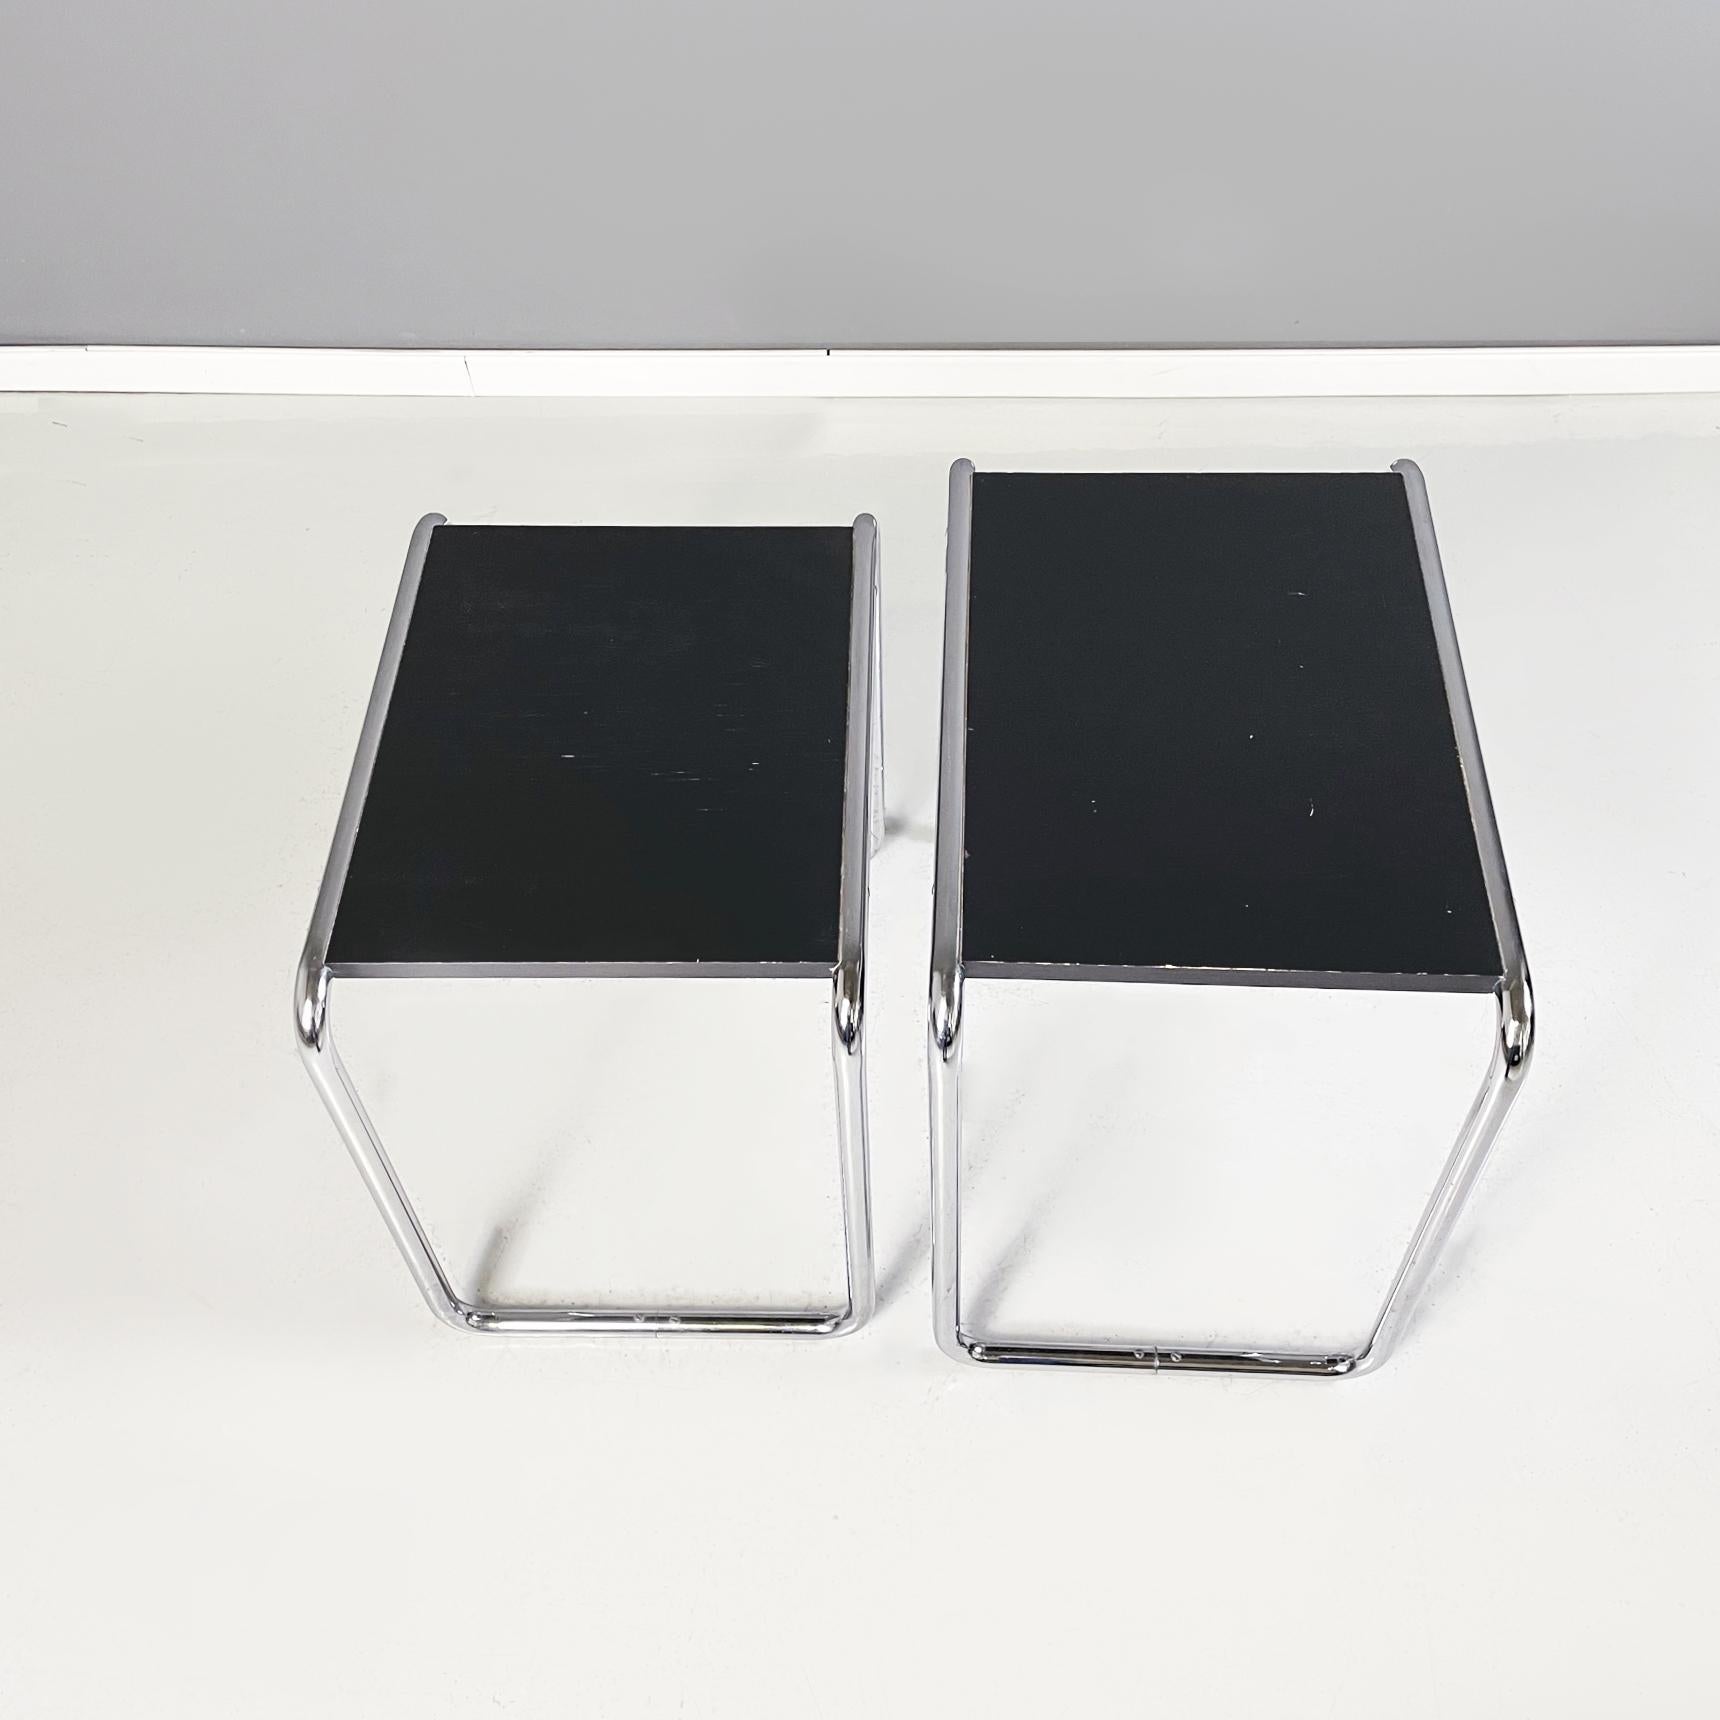 Late 20th Century German Black Wood and Steel Coffee Tables by Arnold Bauhaus Collection, 1980s For Sale